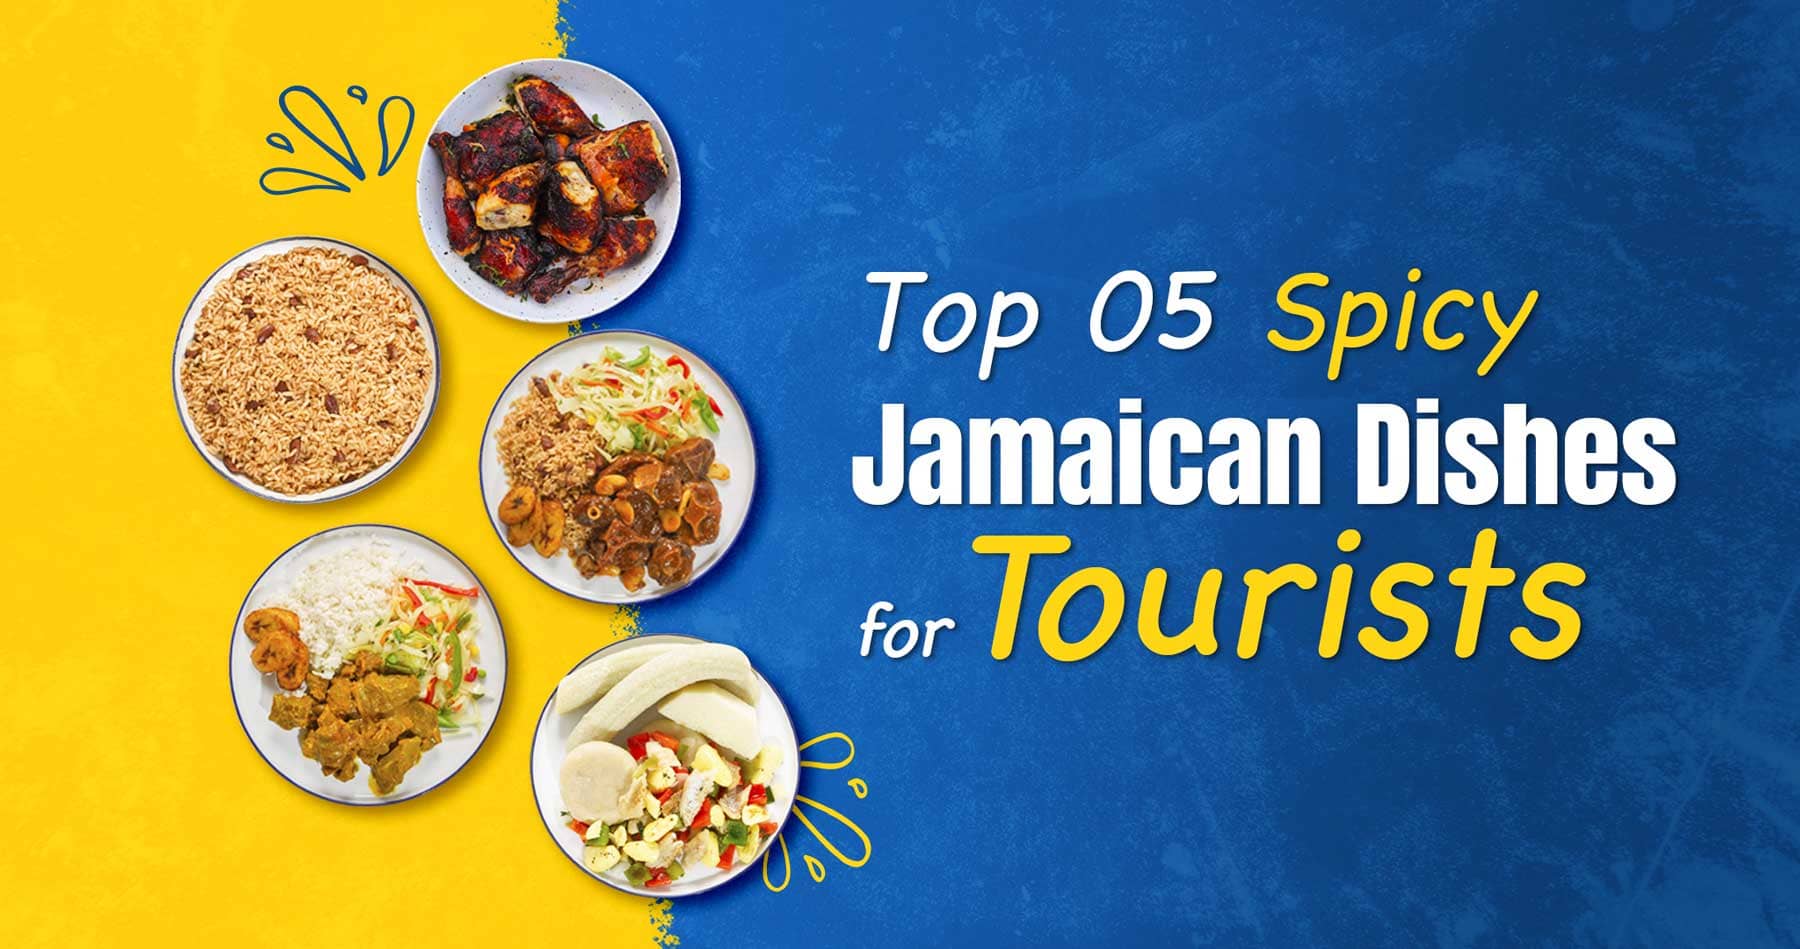 Food Delivery Service in Jamaica: Top 05 Spicy Dishes for Tourists